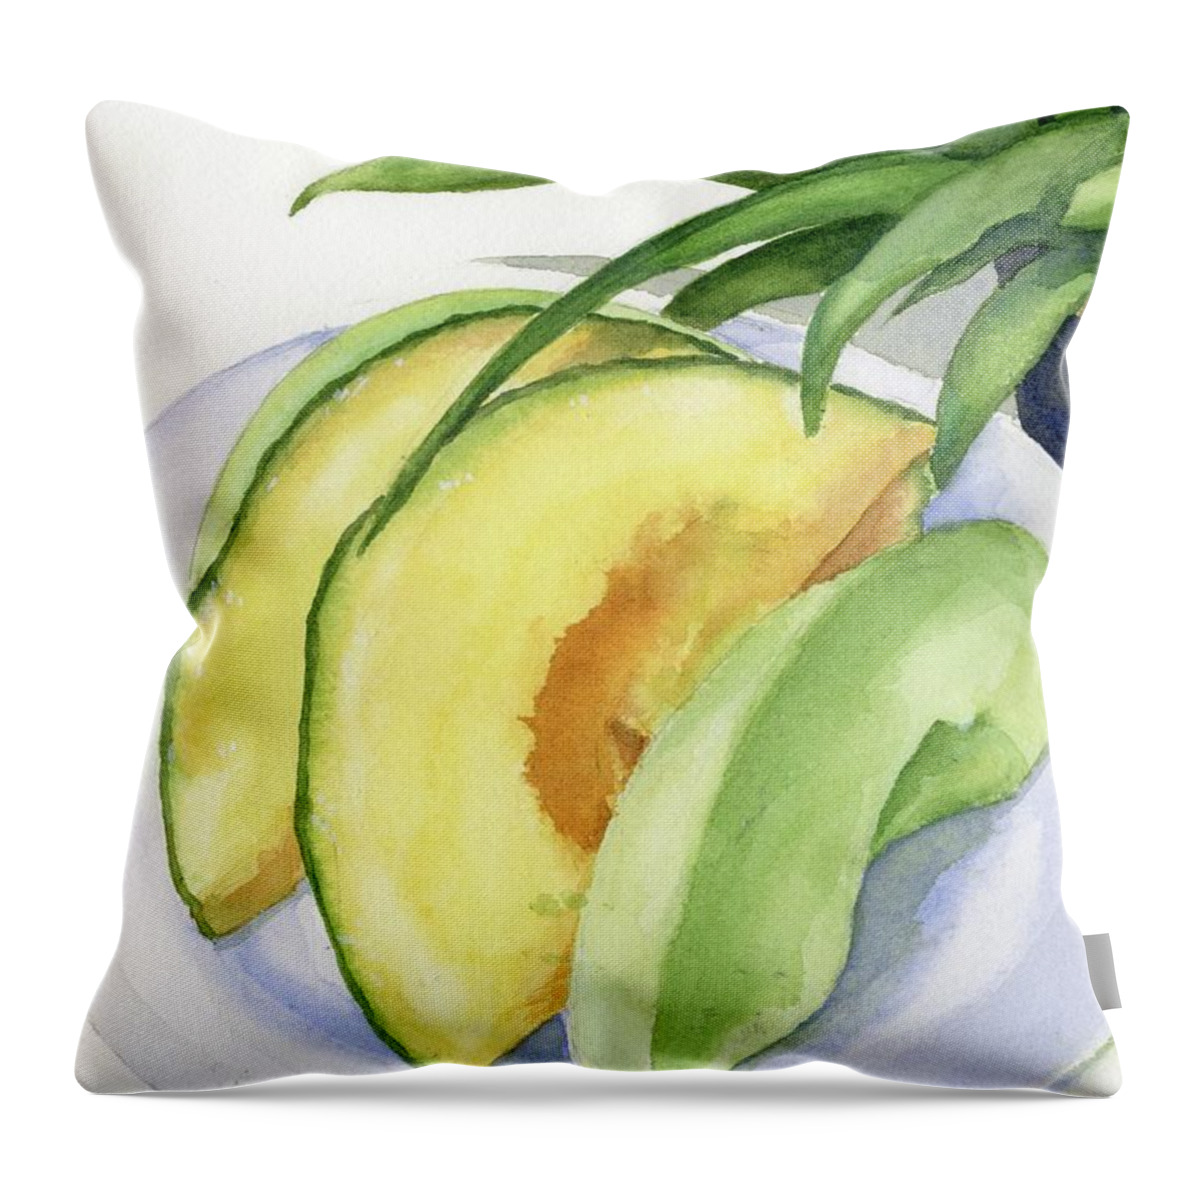 Melon Throw Pillow featuring the painting Melon Color Baby by Marsha Elliott